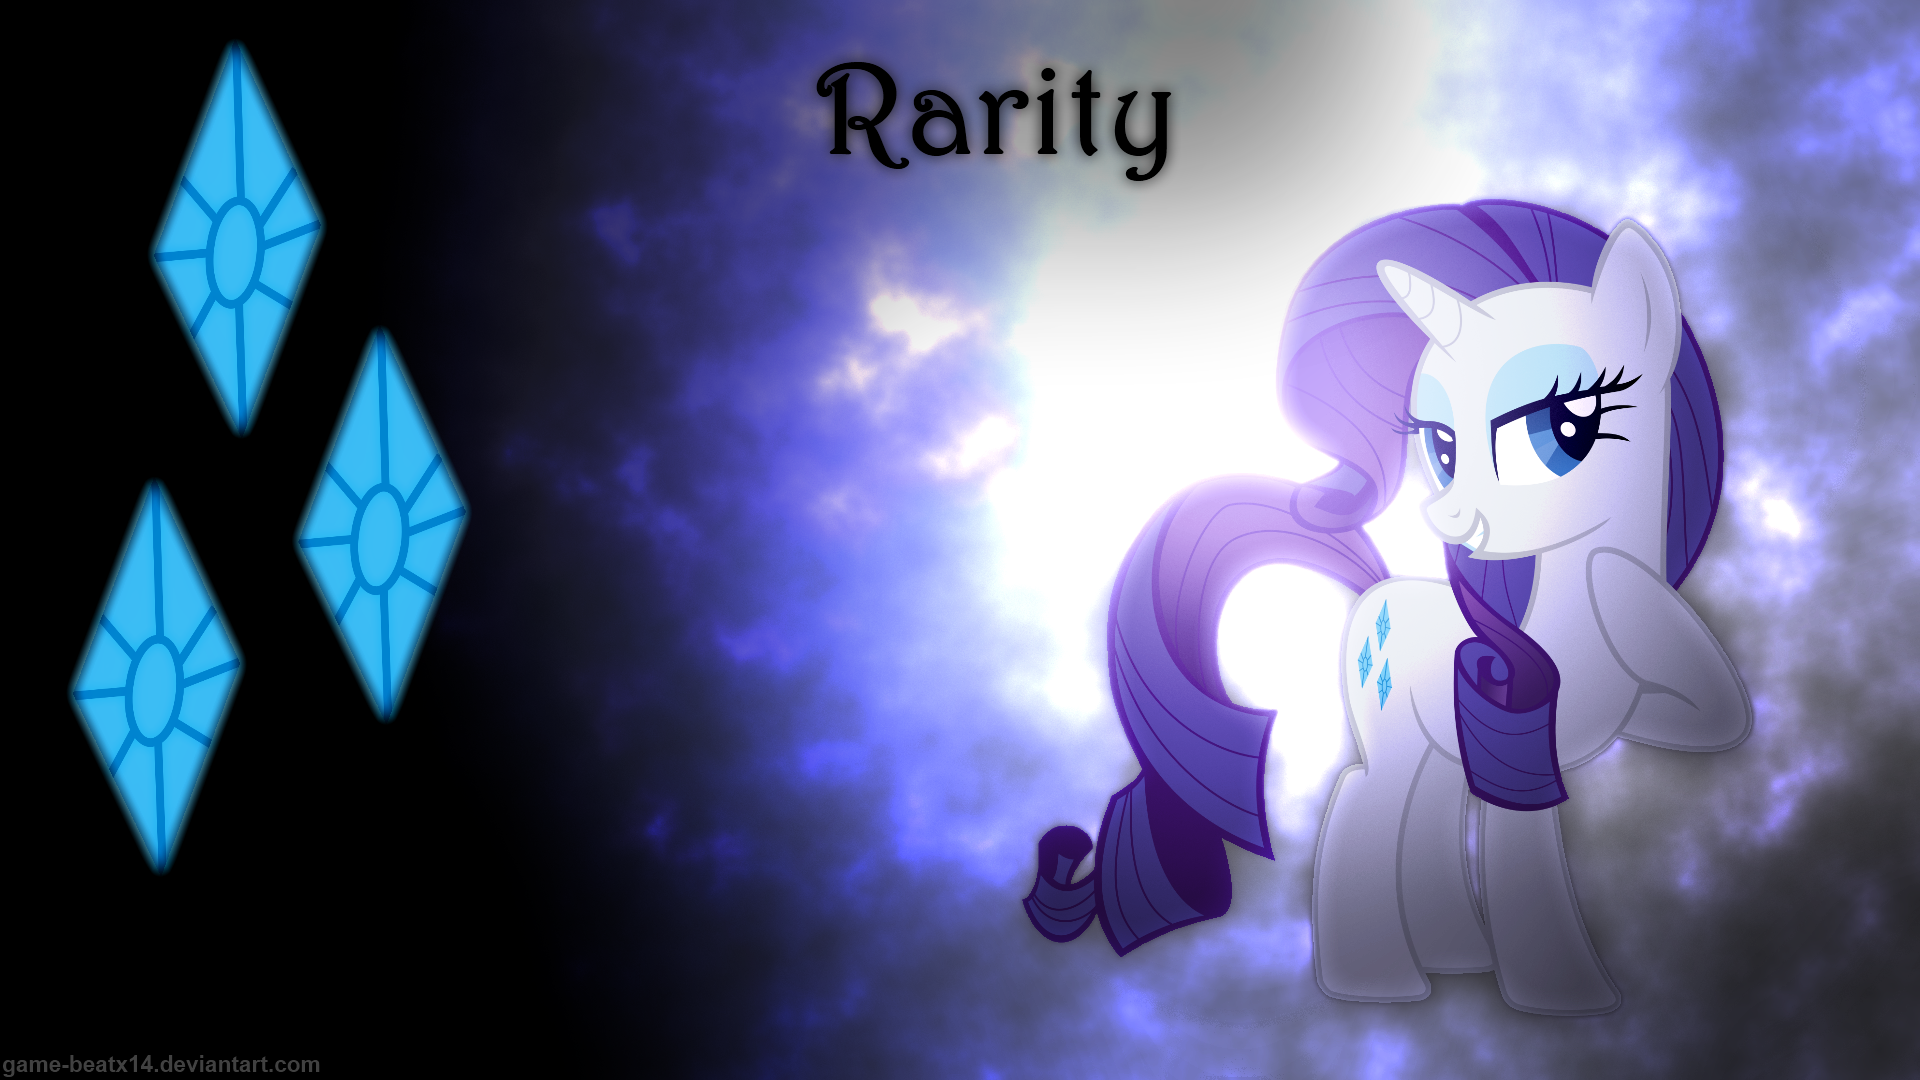 Rarity Wallpaper 2 by AlmostFictional, BlackGryph0n and Game-BeatX14